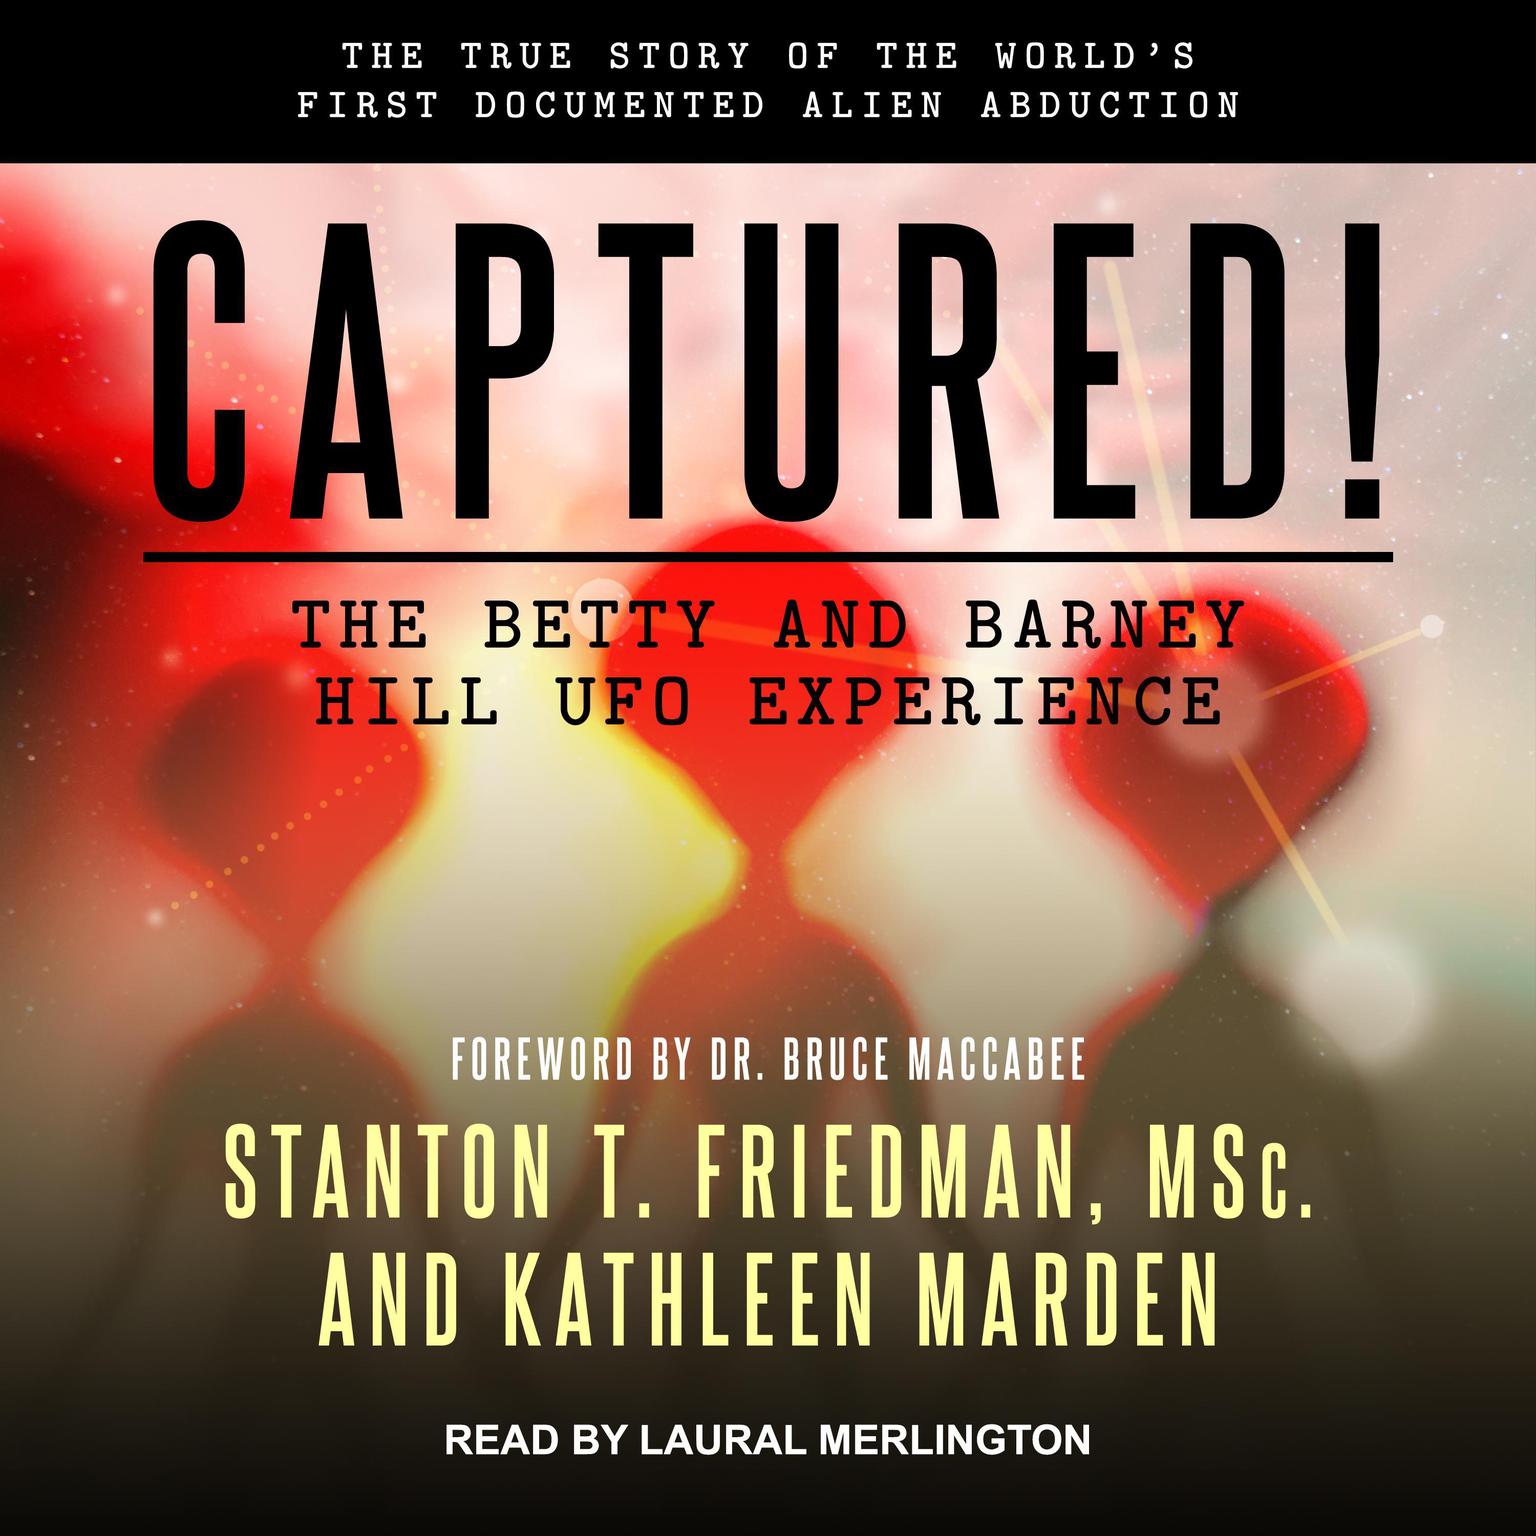 Captured! The Betty and Barney Hill UFO Experience: The True Story of the Worlds First Documented Alien Abduction Audiobook, by Kathleen Marden